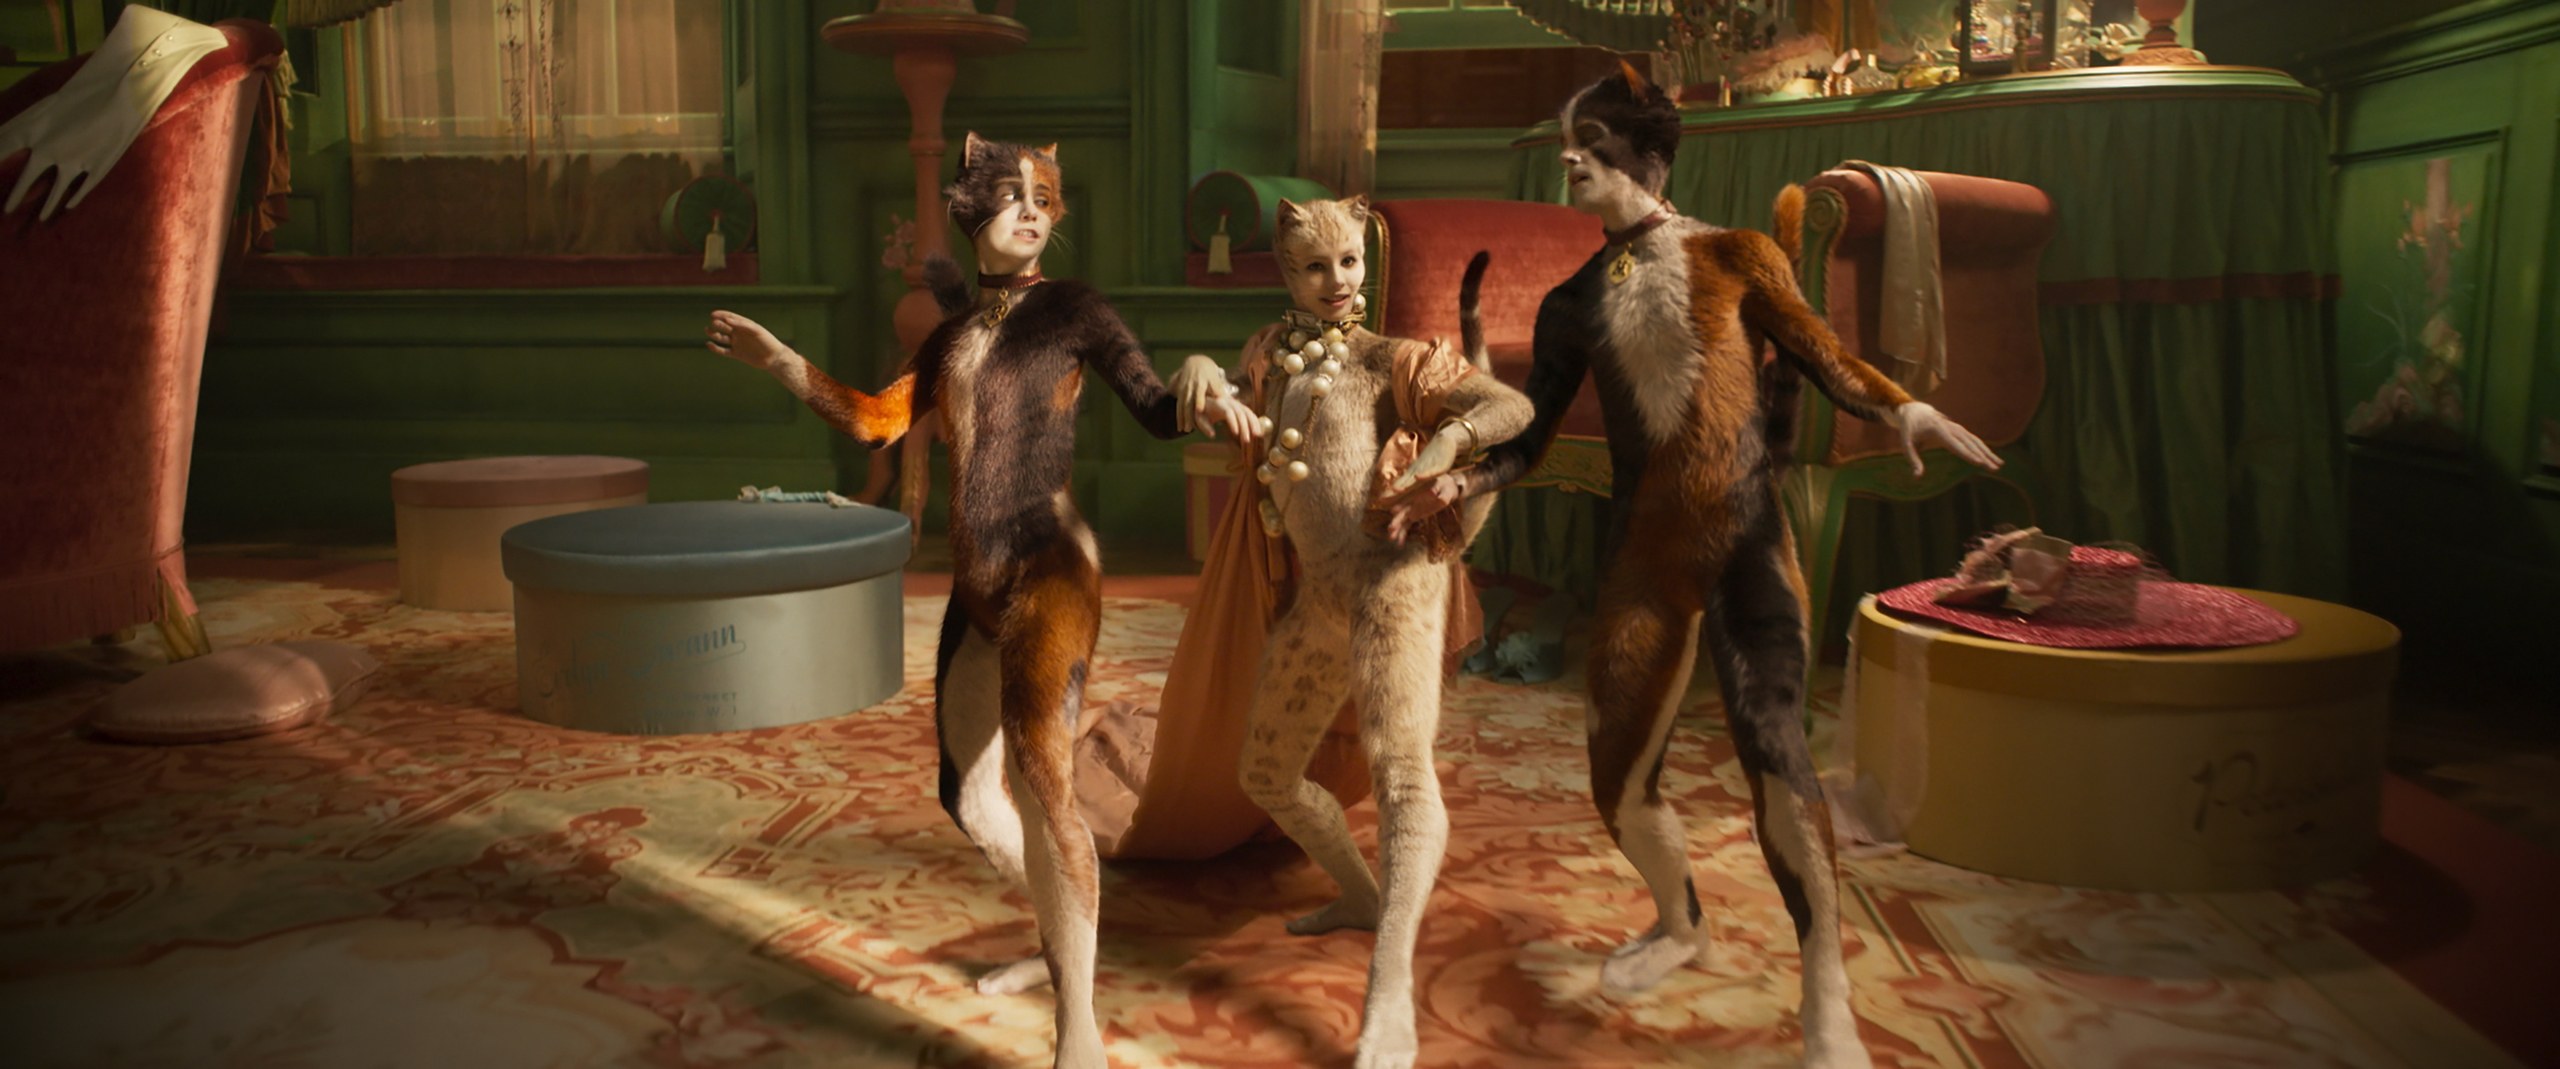 Film Review: CATS